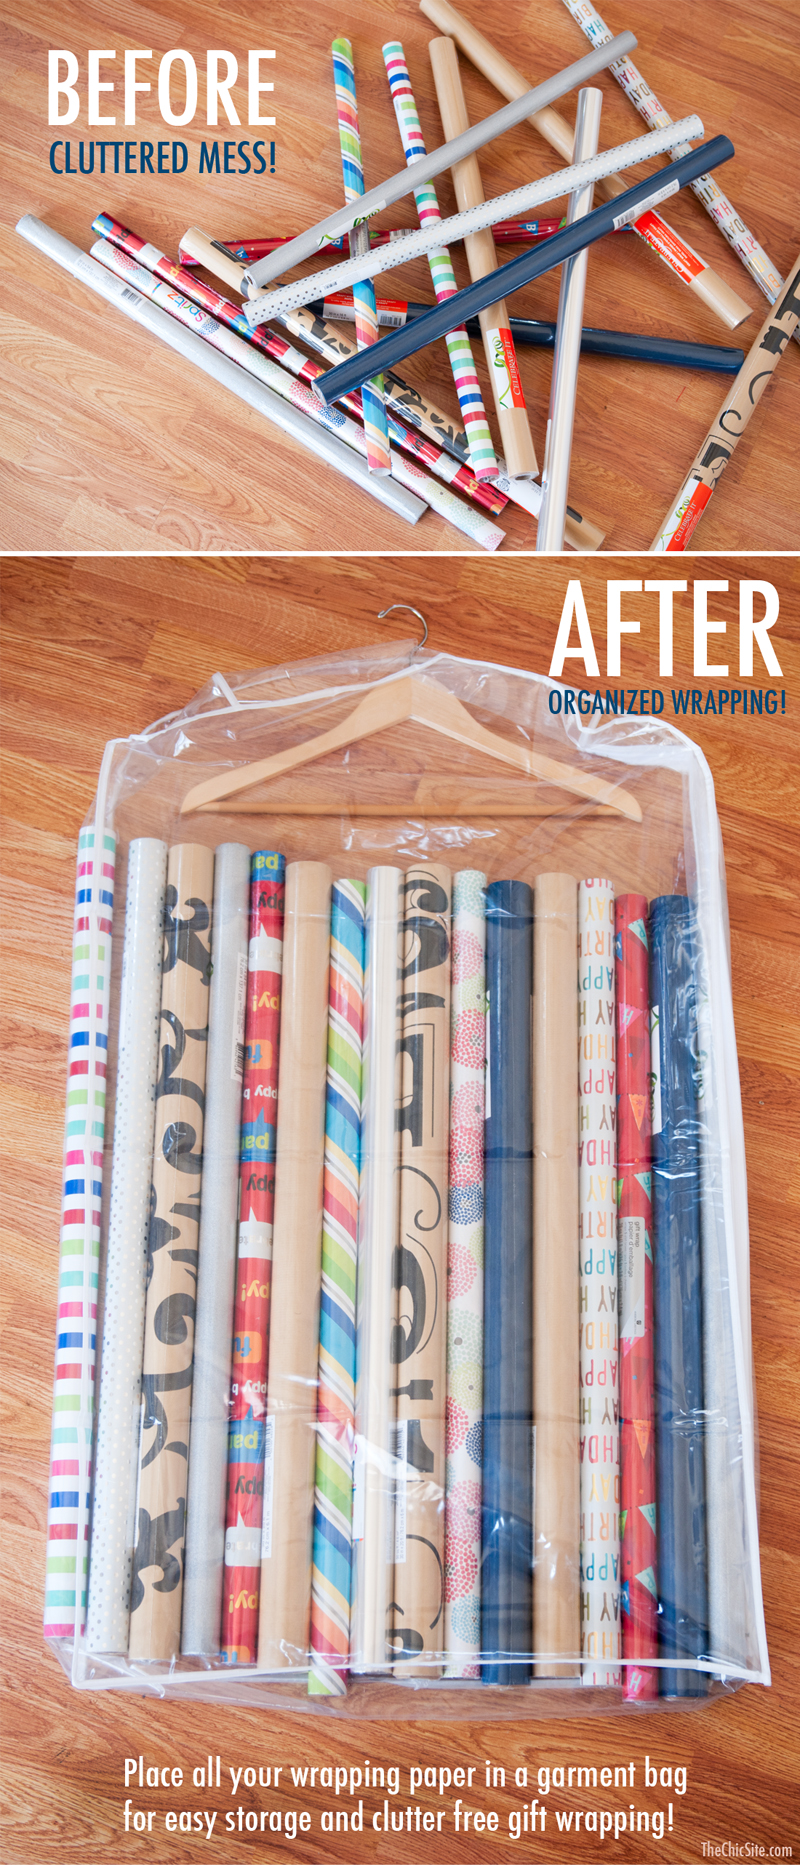 Before and after wrapping paper.